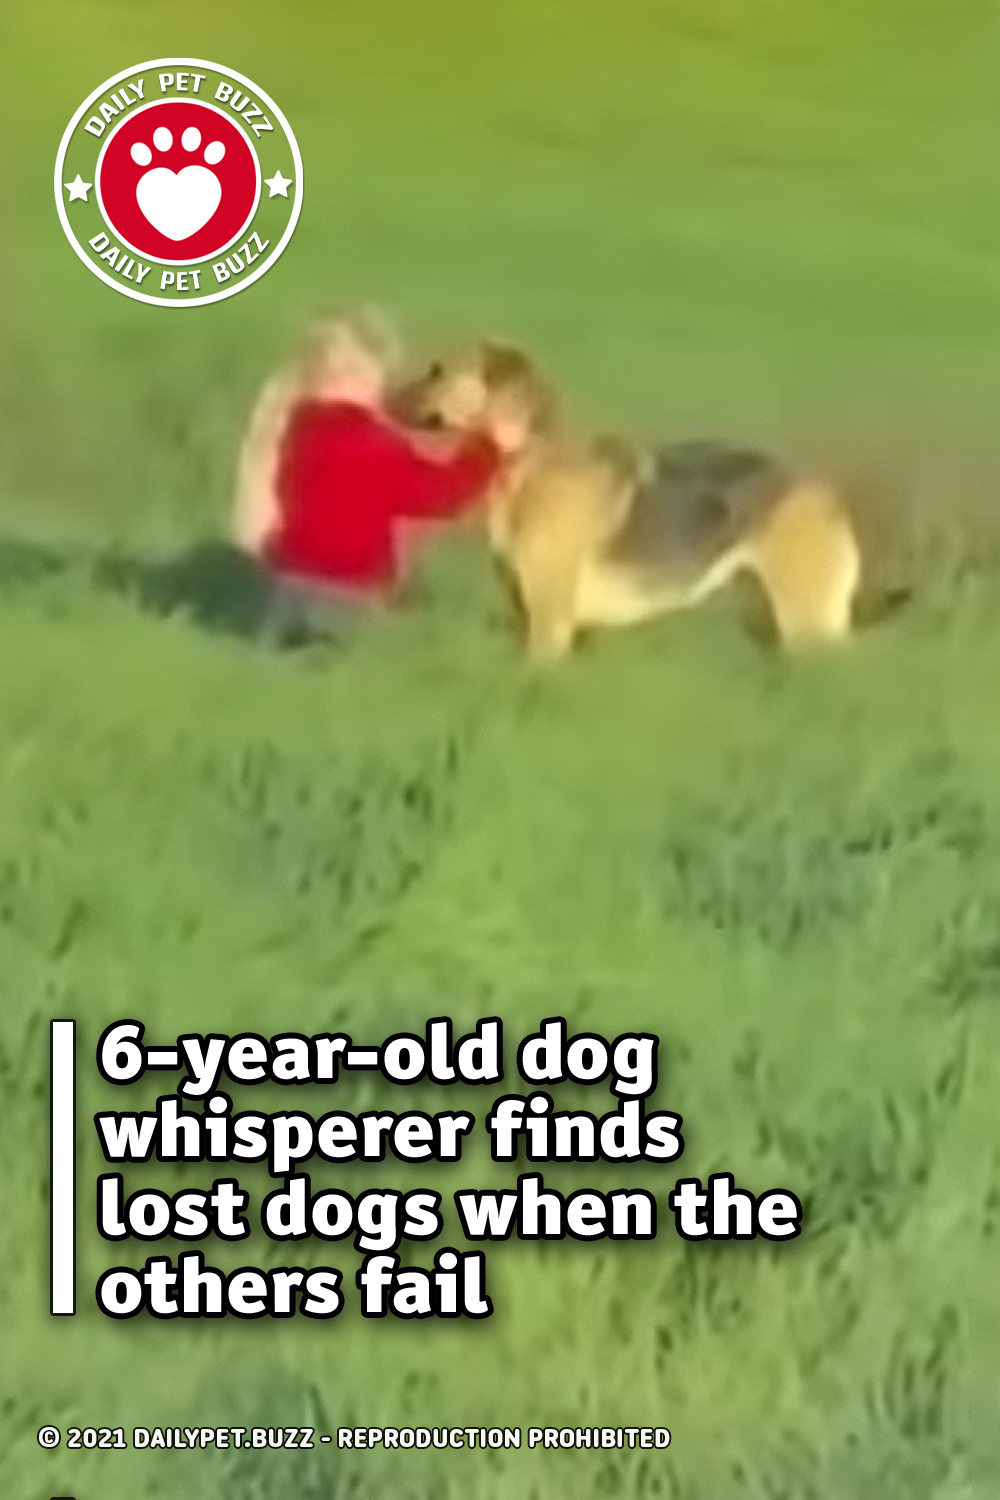 6-year-old dog whisperer finds lost dogs when the others fail